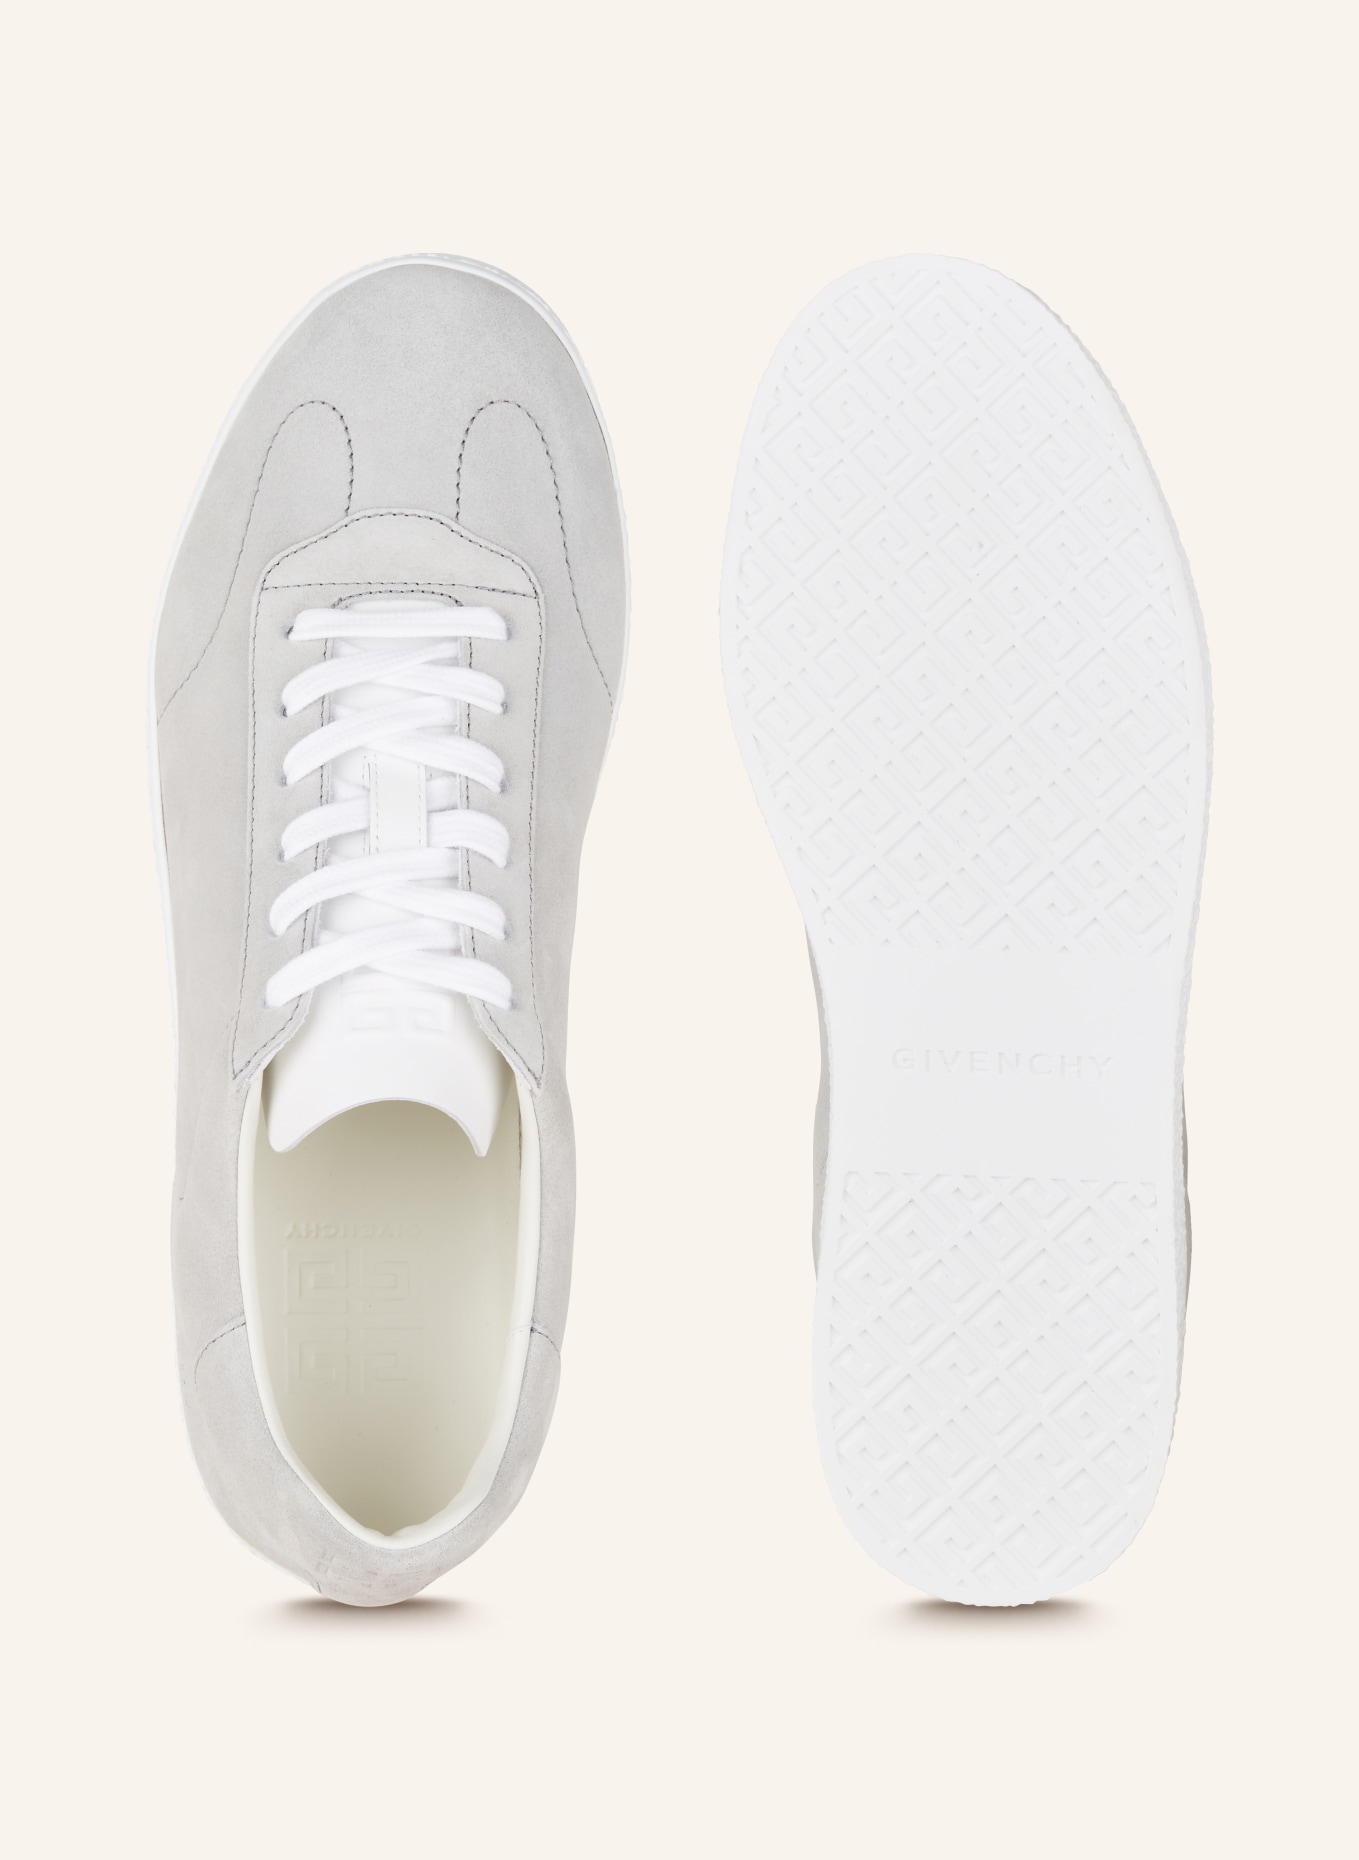 GIVENCHY Sneakers TOWN, Color: LIGHT GRAY (Image 5)